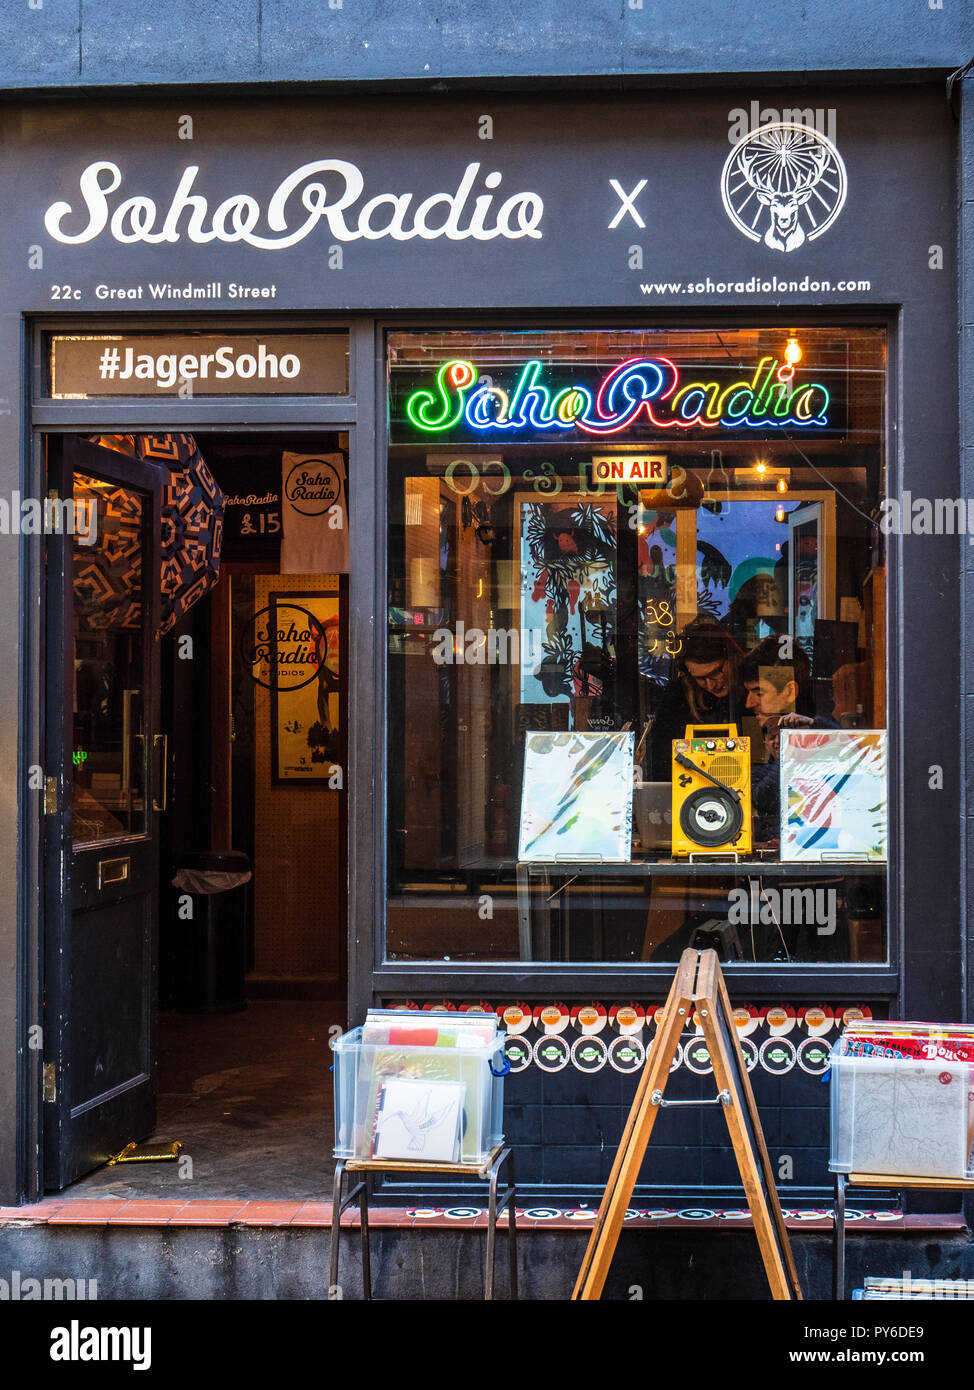 Soho Radio London - an online radio station broadcasting from the heart of London's Soho entertainment district. Founded 2014, Great Windmill Street, Stock Photo